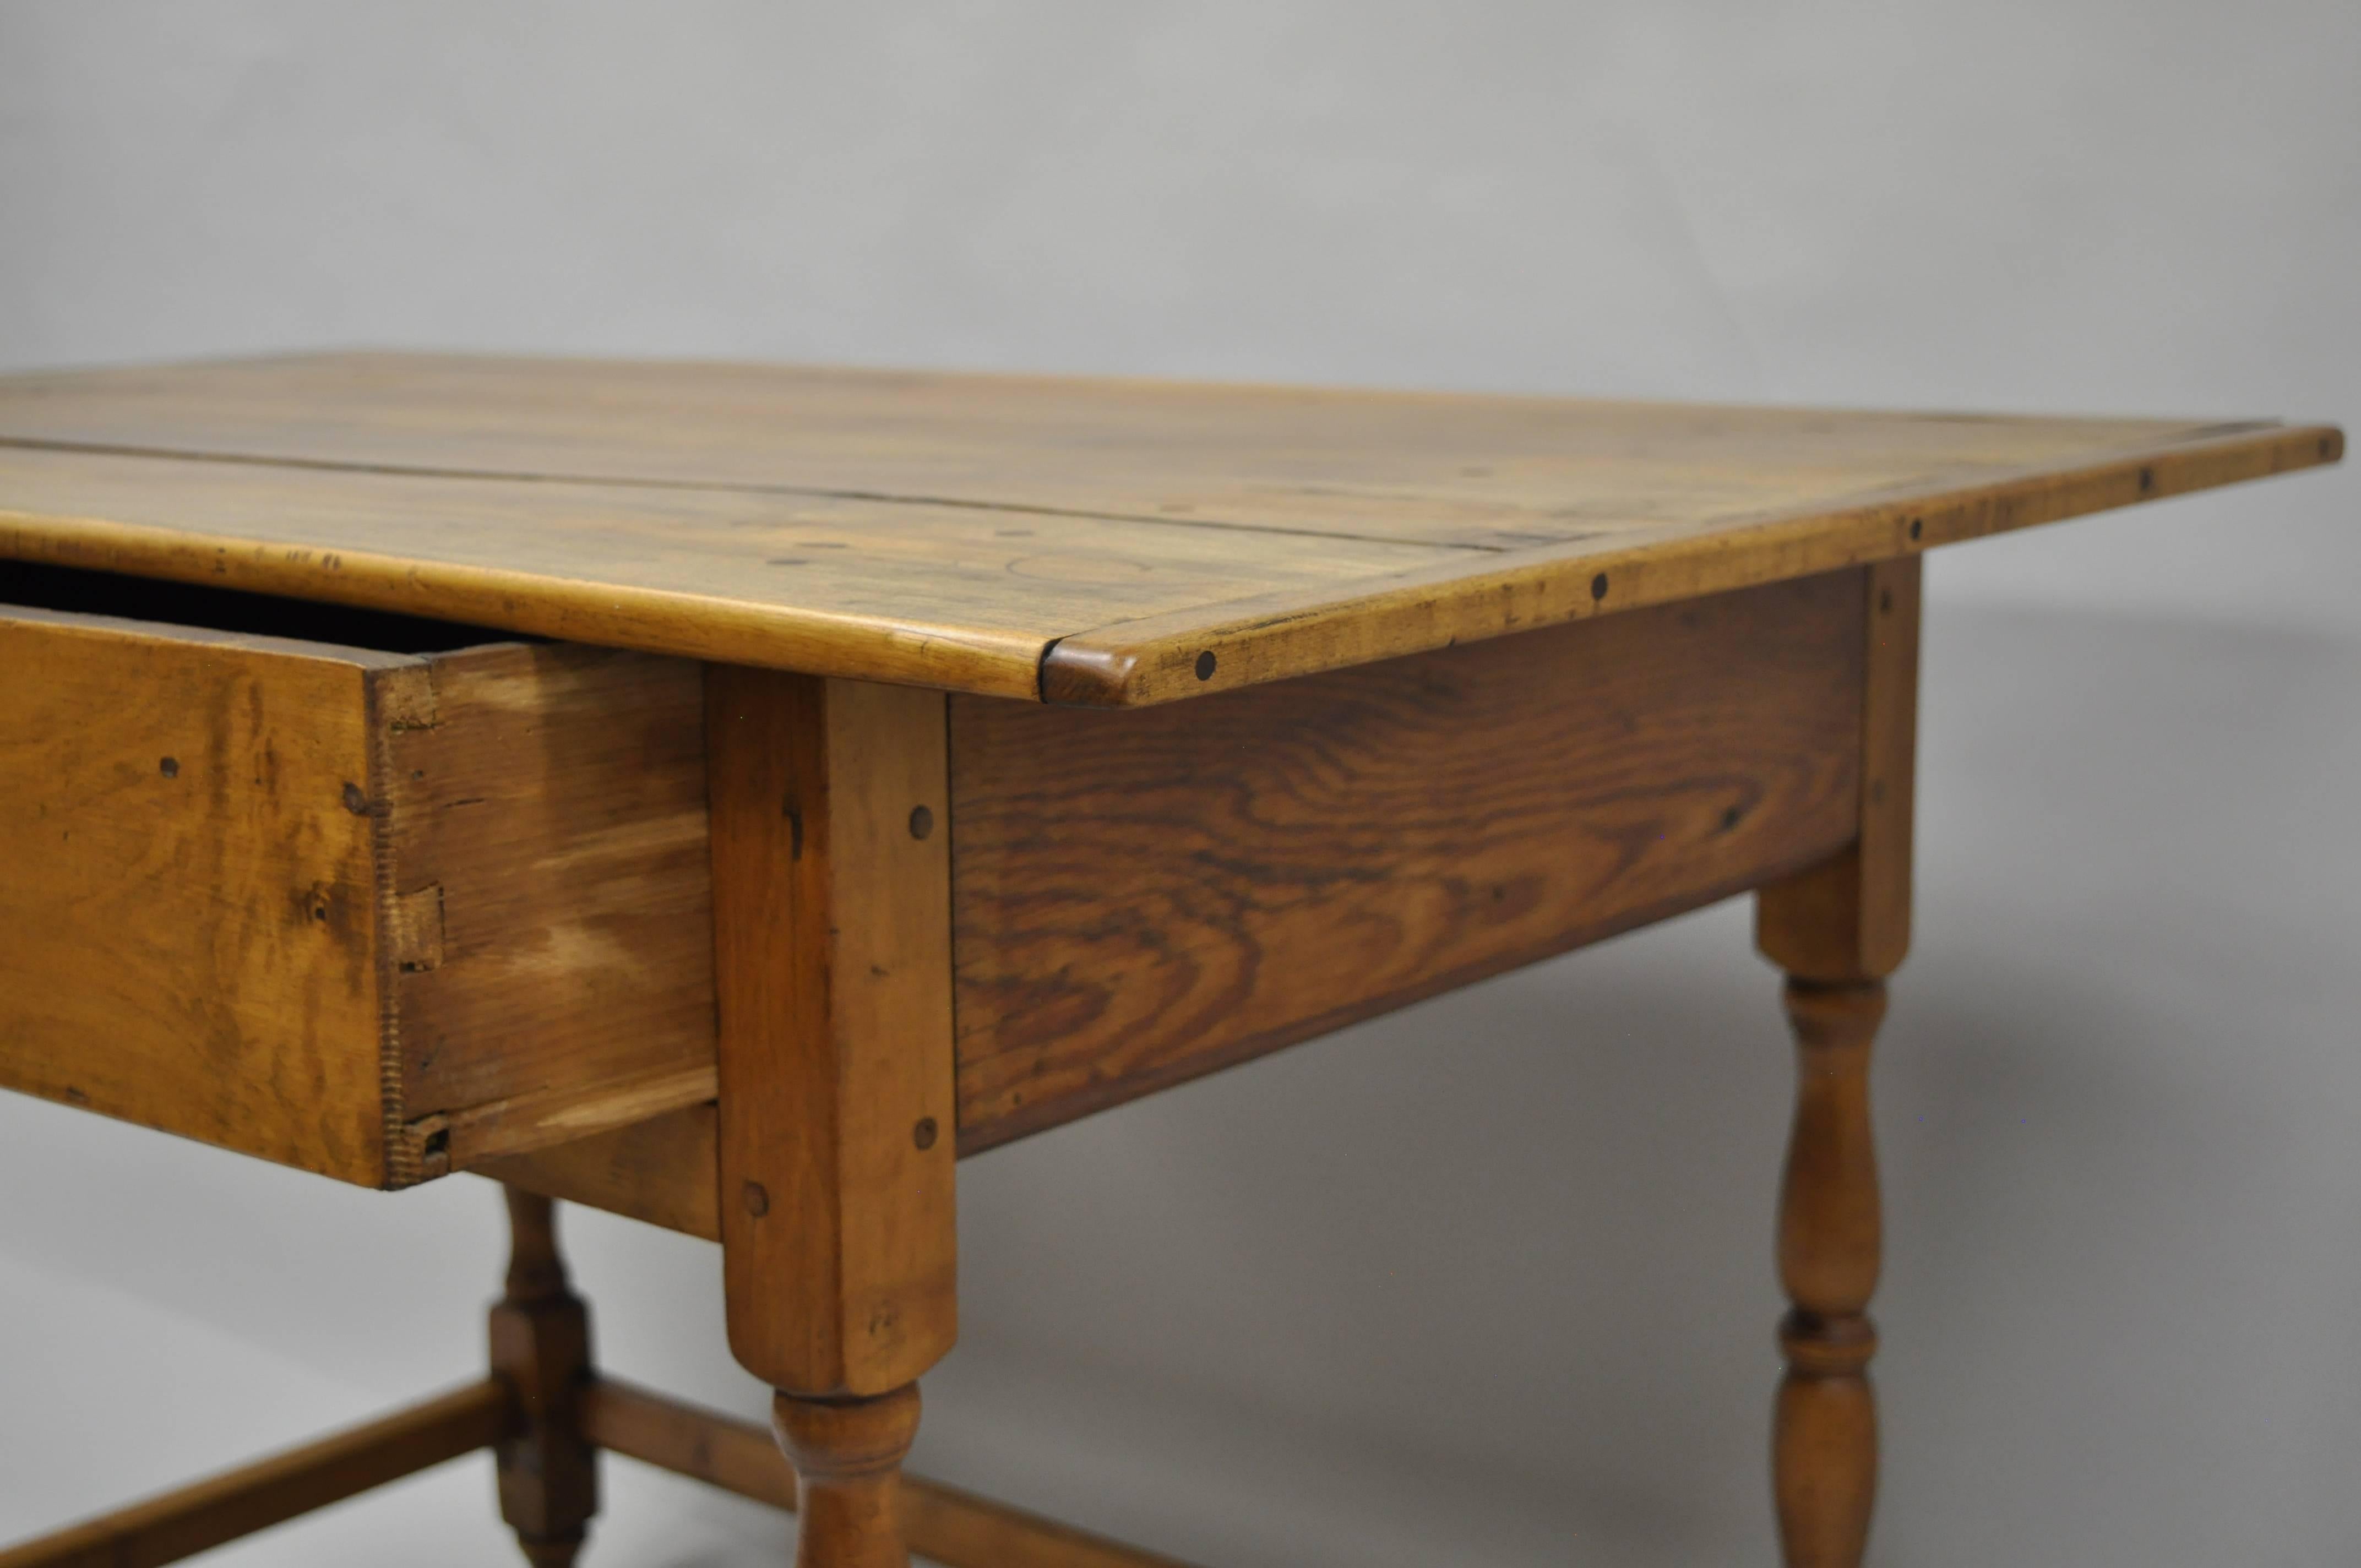 Antique American maple and pine wood tavern table with drawer, circa early 1800s. Item features a single dovetailed drawer, turn carved legs, wooden pin construction, stretcher base, and elongated old scrubbed plank top with various dowels and pins.